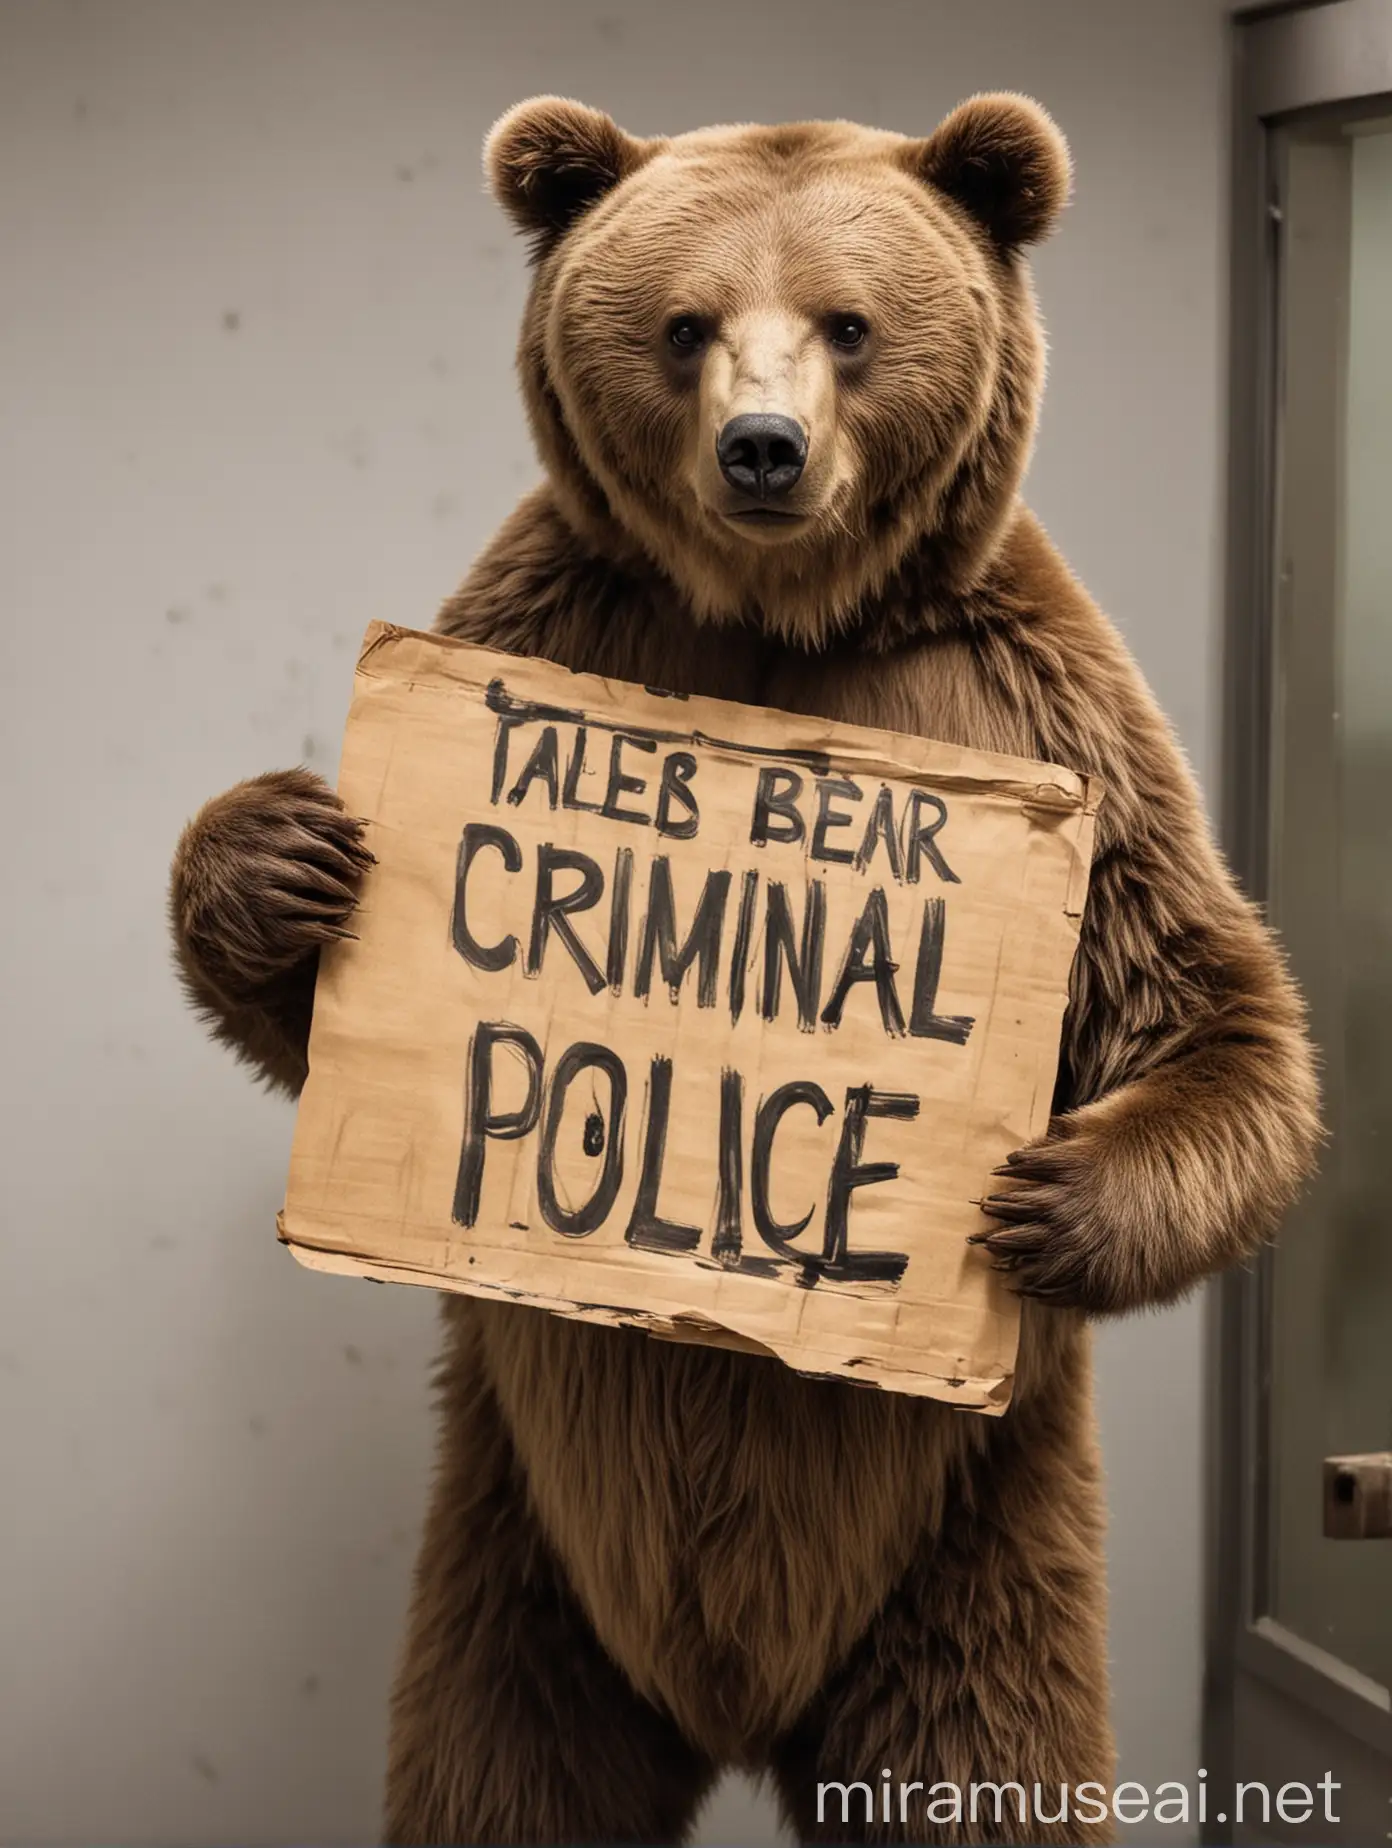 Mischievous Bear Holding Criminal Sign at Police Station